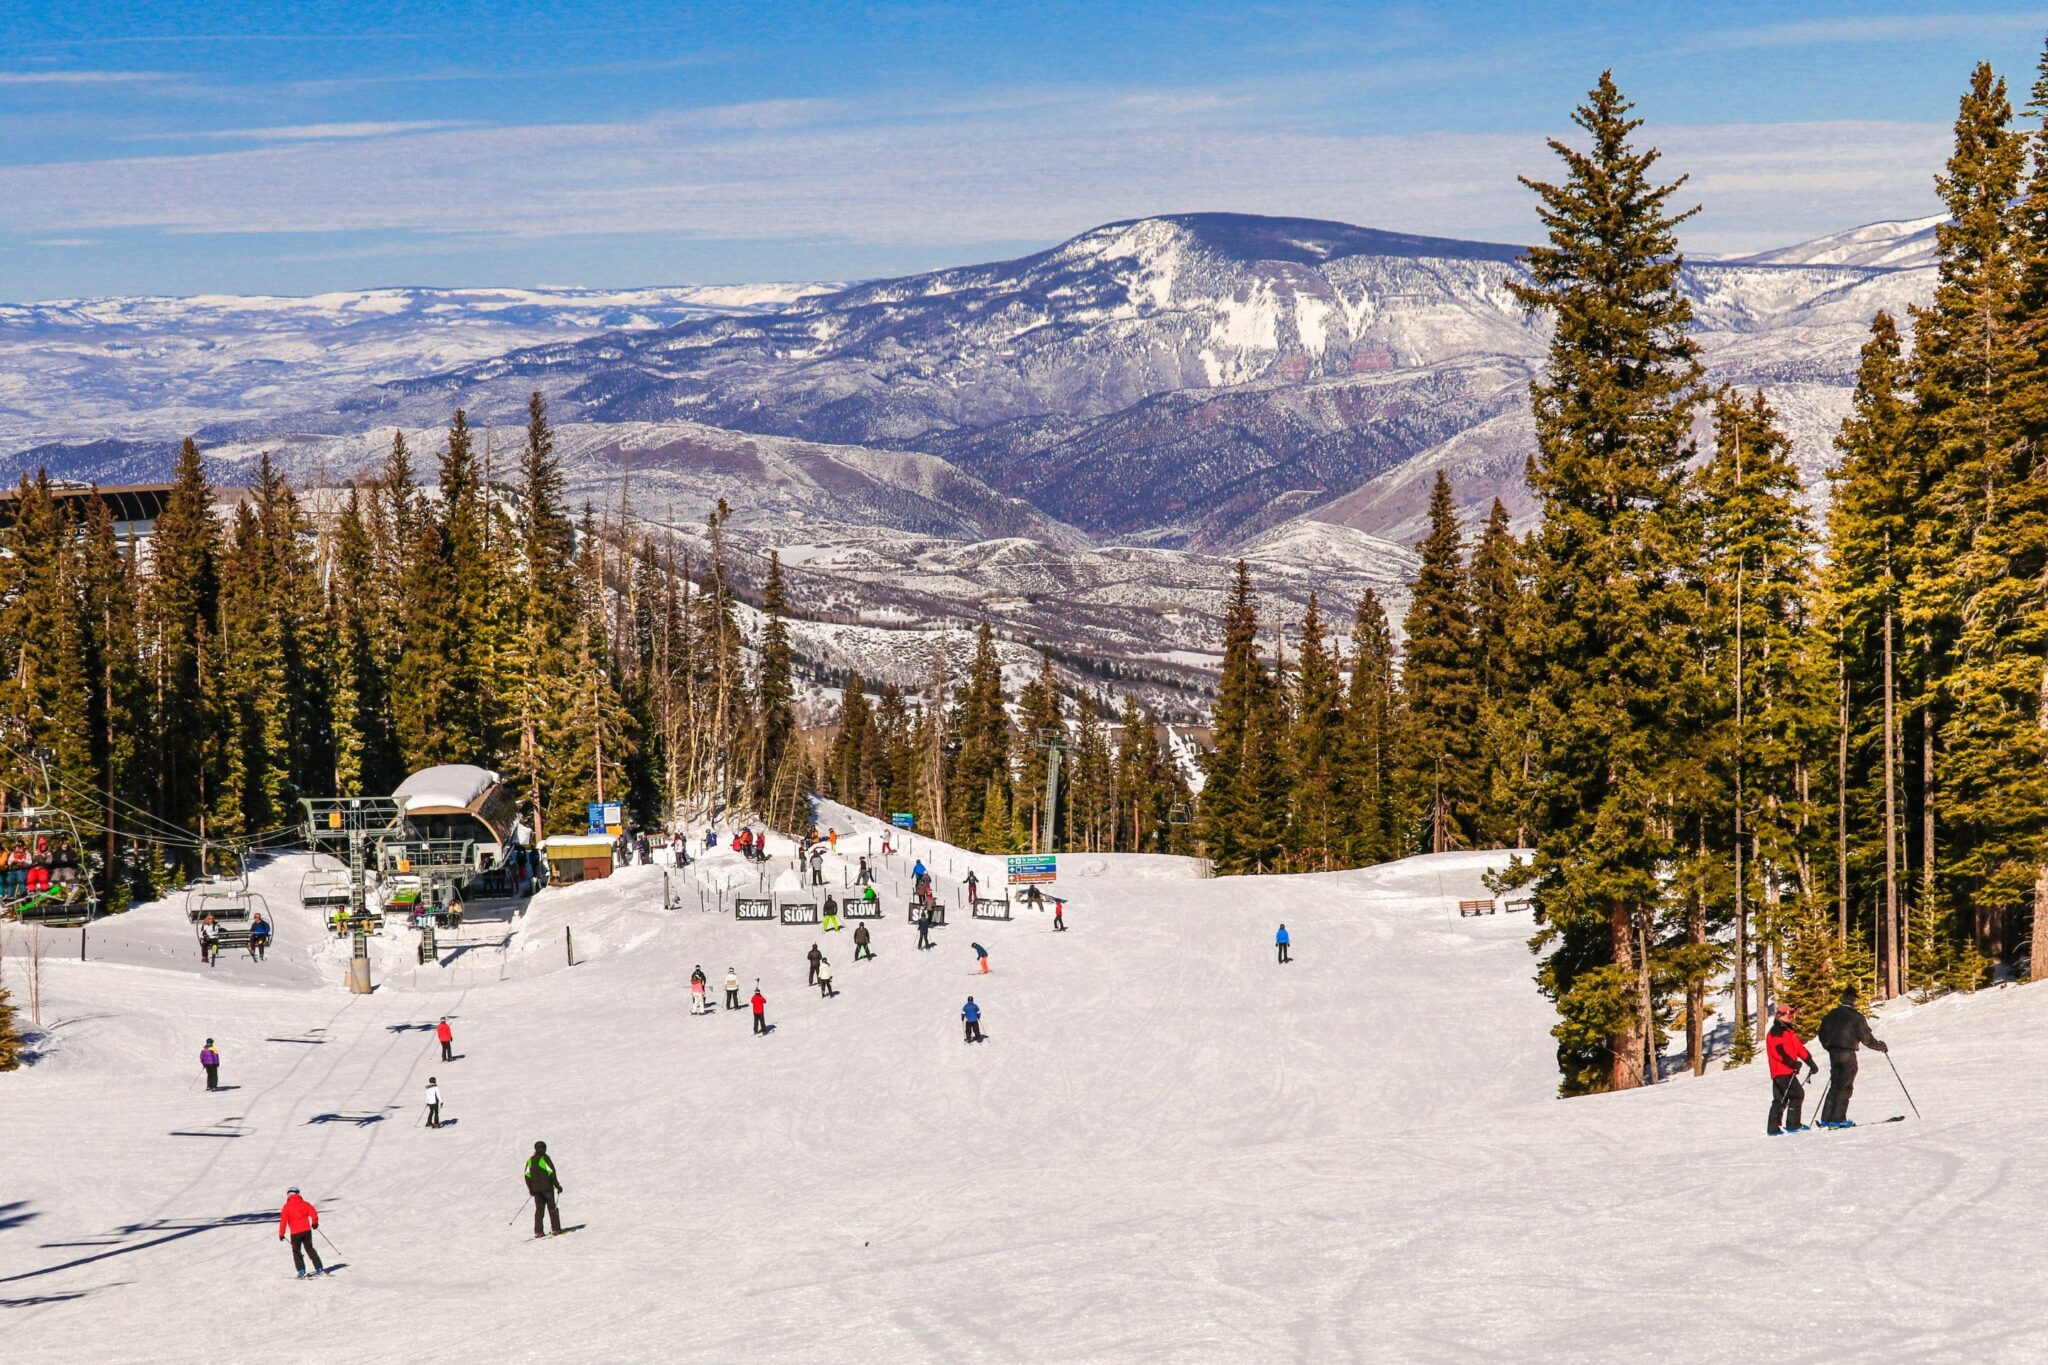 view from the top of a ski resort with people riding down the mountain and another mountain on the horizon